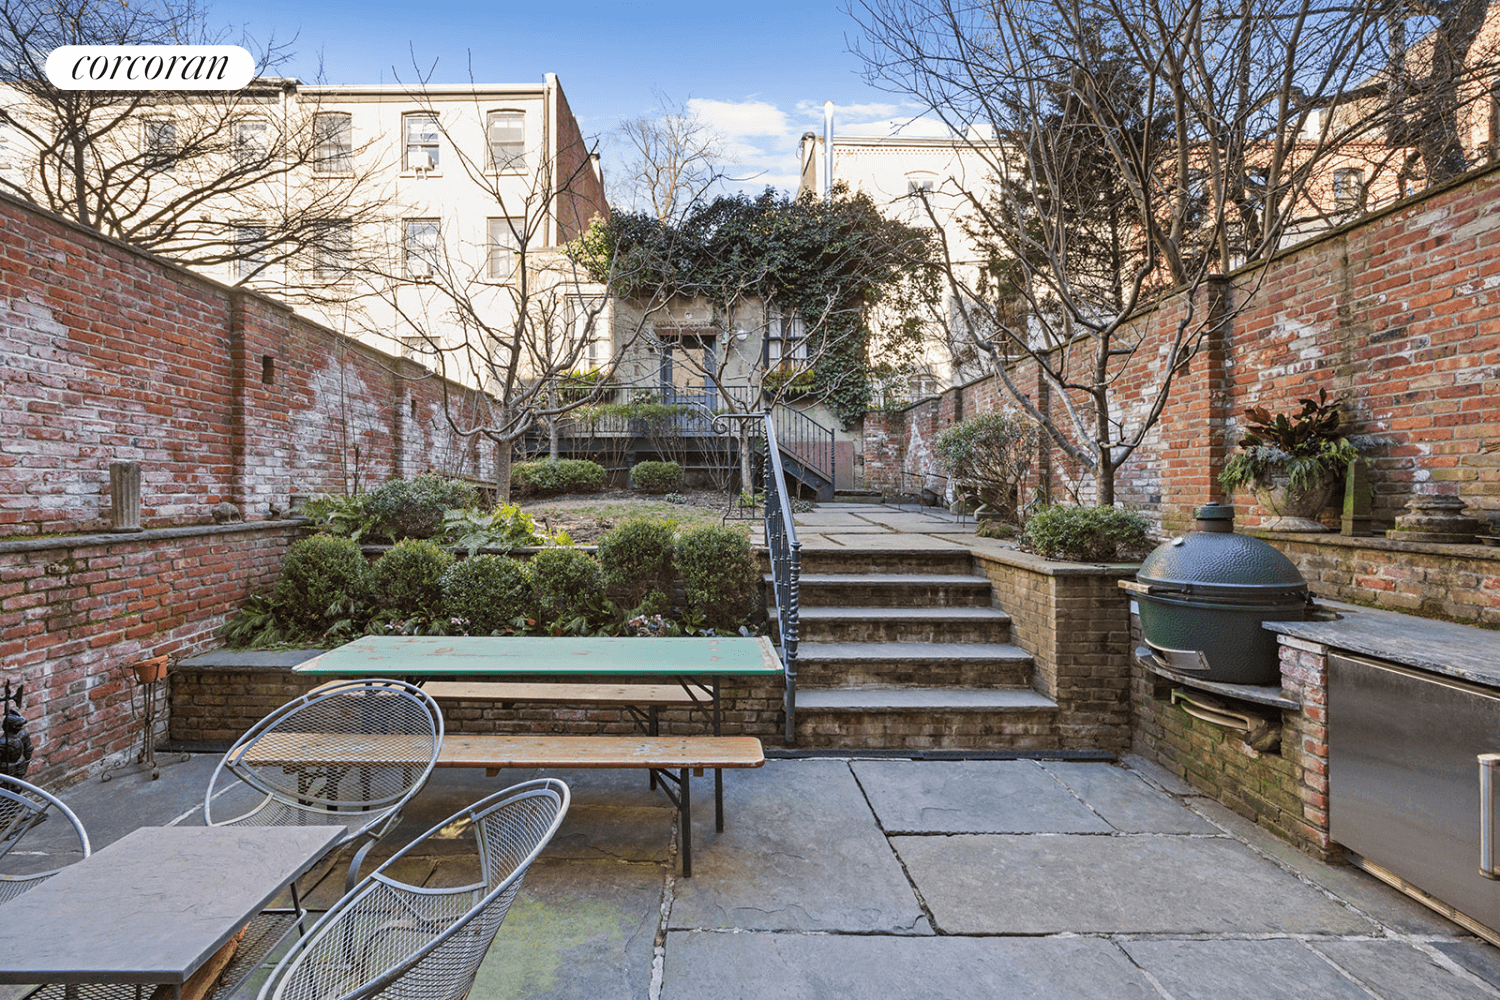 Welcome to 155 Warren Street, a perfectly preserved, single family townhouse nestled in the heart of the serene neighborhood of Cobble Hill.